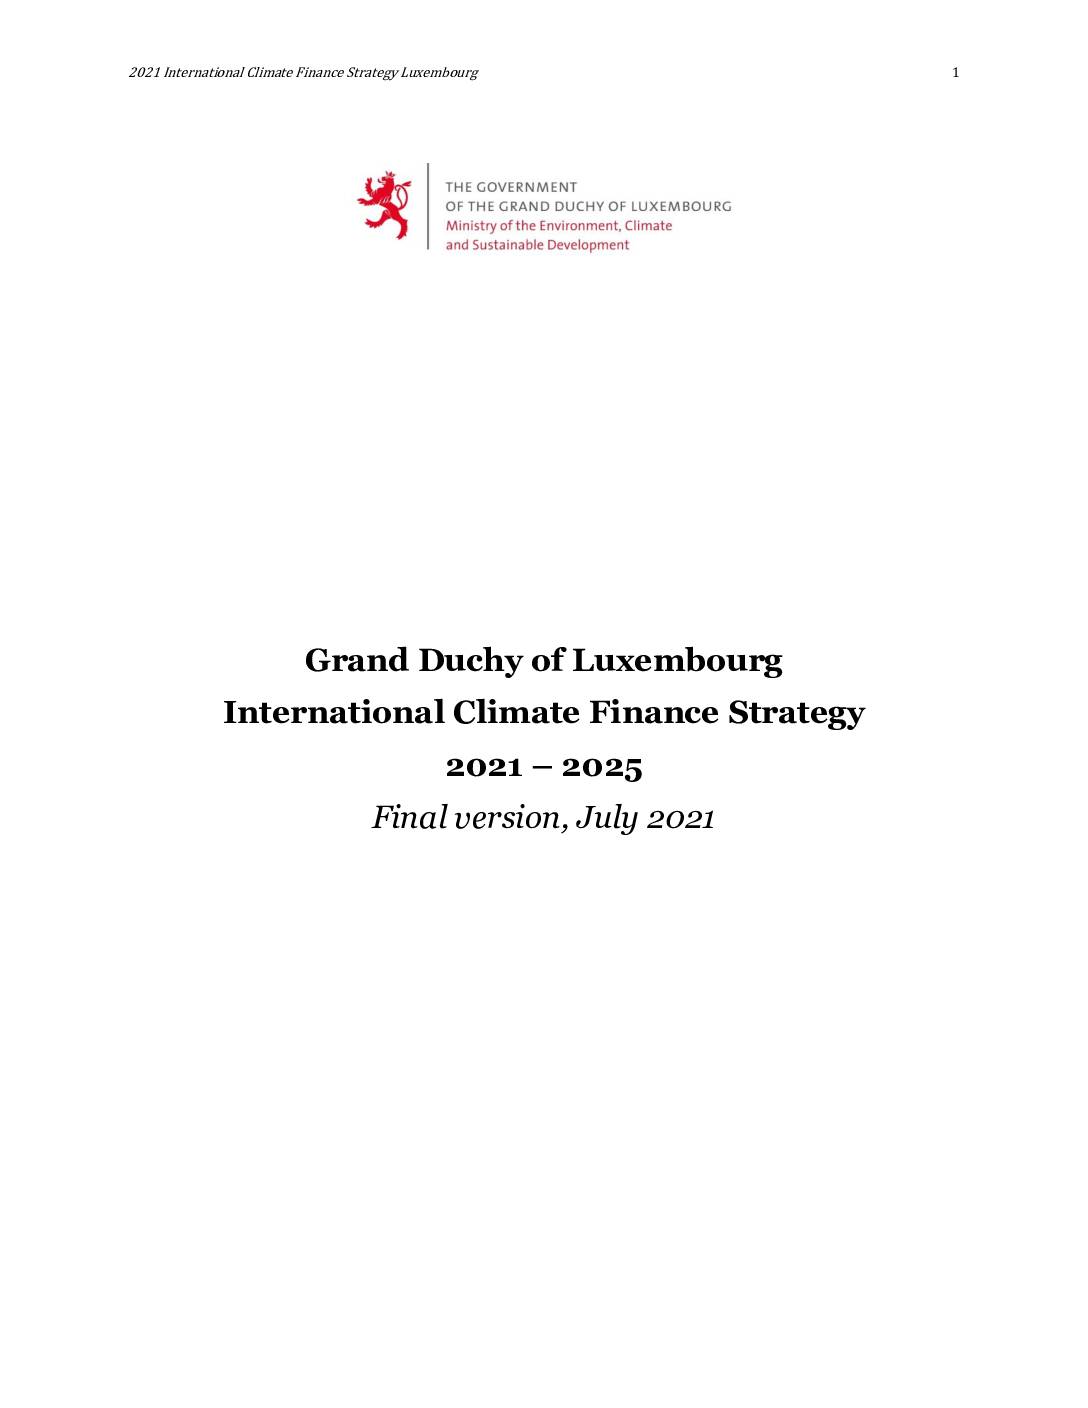 The Government of the Grand Duchy of Luxembourg: International Climate Finance Strategy